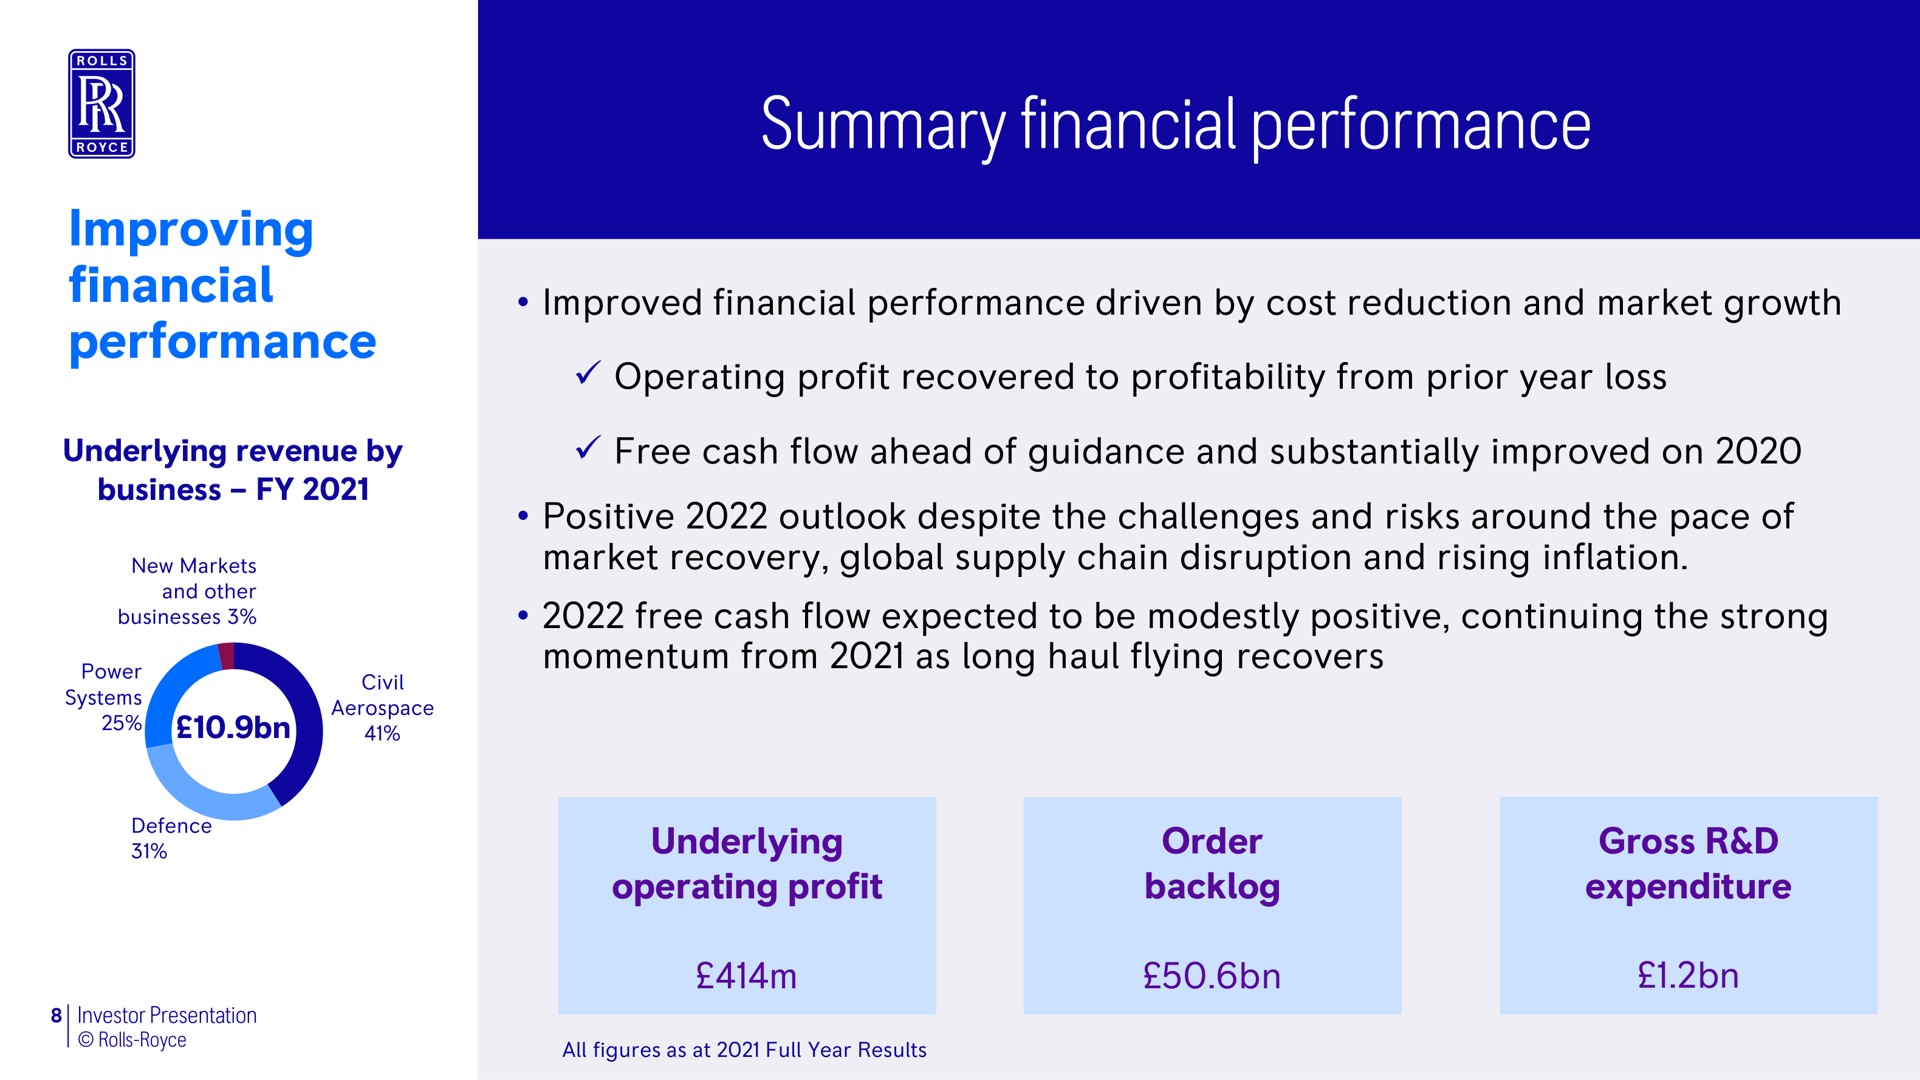 improving financial performance our financial performance was severely impacted by the covid pandemic summary financial performance improved financial performance driven by cost reduction and market growth operating profit recovered to profitability from prior year loss free cash flow ahead of guidance and substantially improved on positive outlook despite the challenges and risks around the pace of market recovery global supply chain disruption and rising inflation free cash flow expected to be modestly positive continuing the strong momentum from as long haul flying recovers underlying operating profit order backlog gross expenditure | Rolls-Royce Holdings